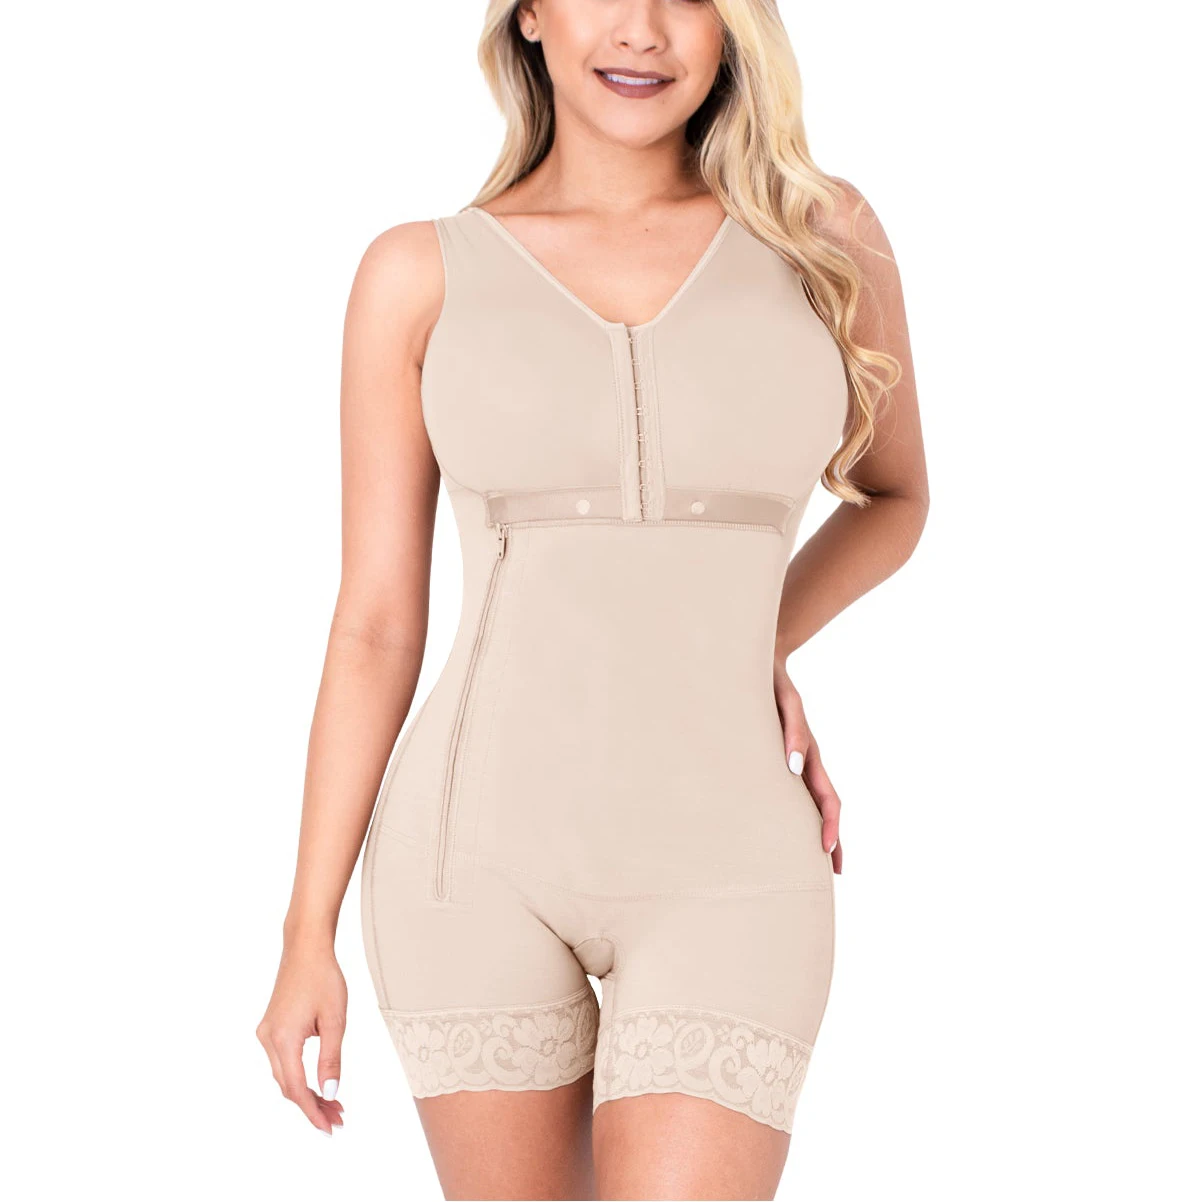 Curvaceous Women's Shapewear Hypo-allergenic Fabric for Sensitive